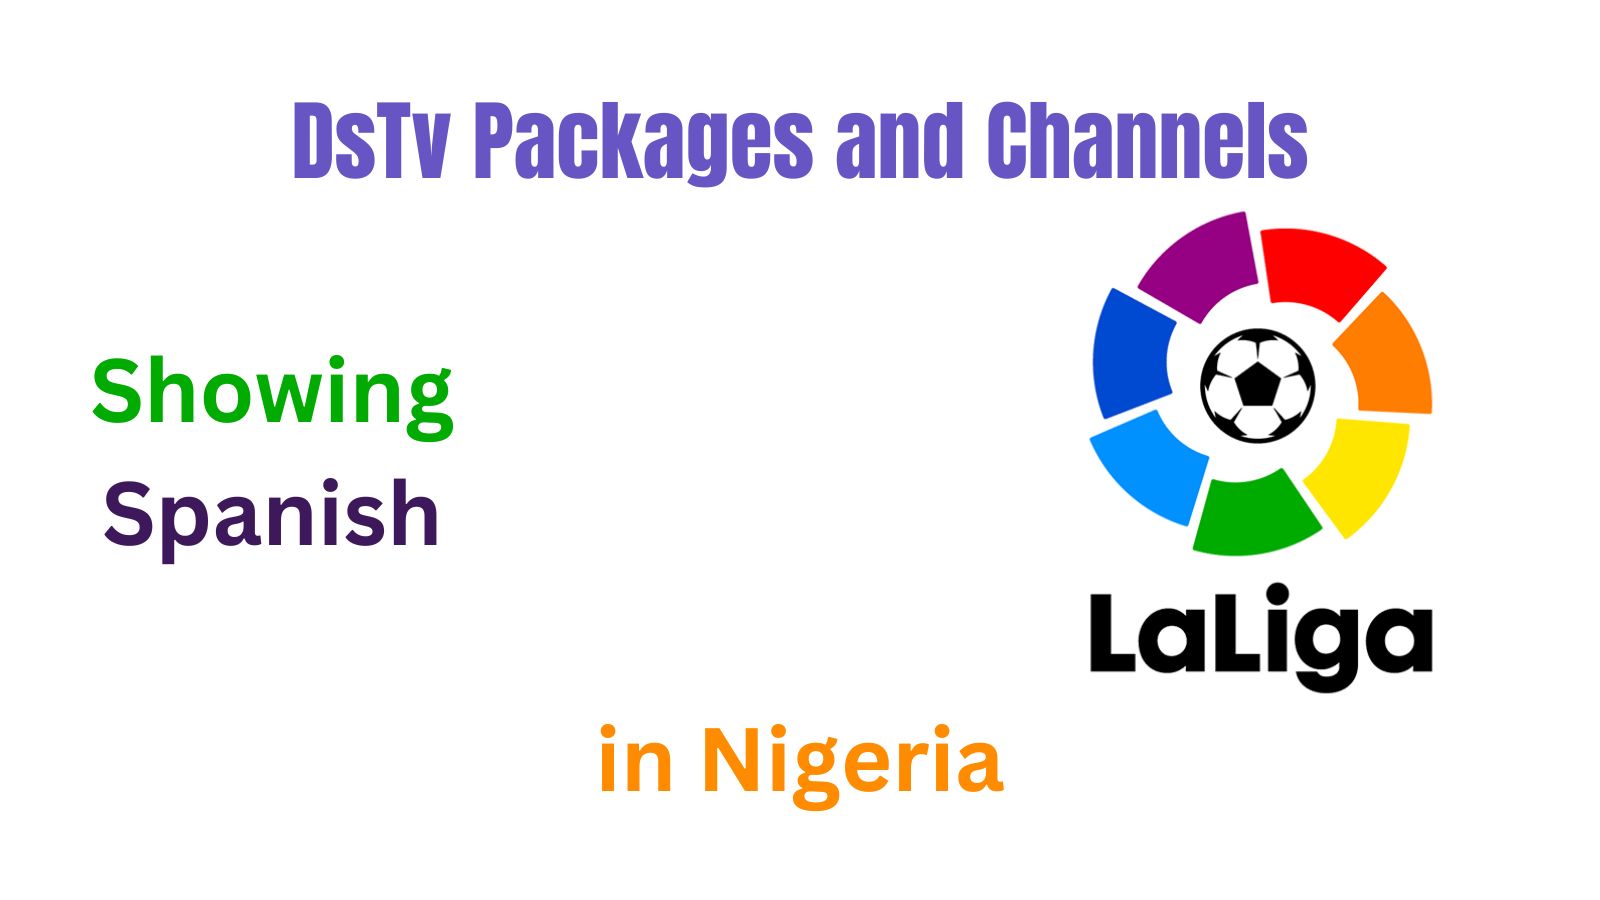 DsTv Packages and Channels showing Spanish LaLiga in Nigeria